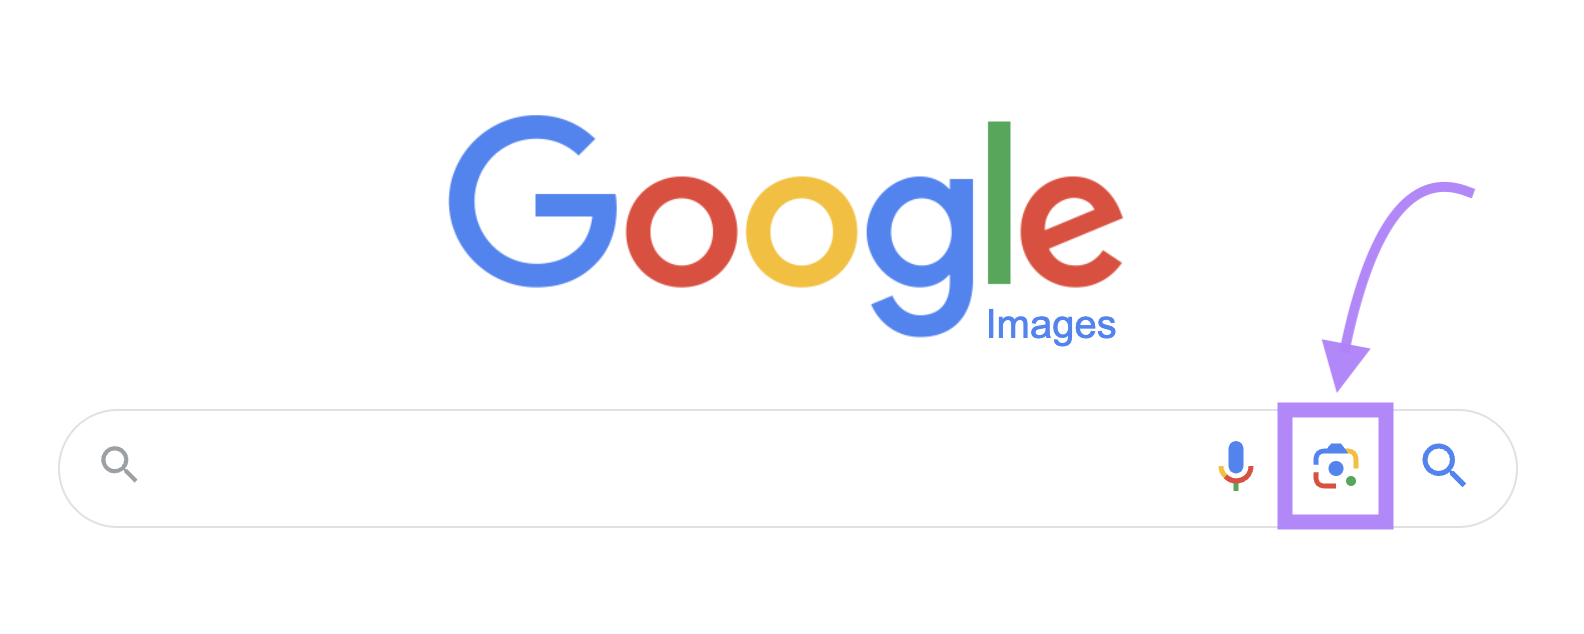 Google Images search bar with camera icon highlighted